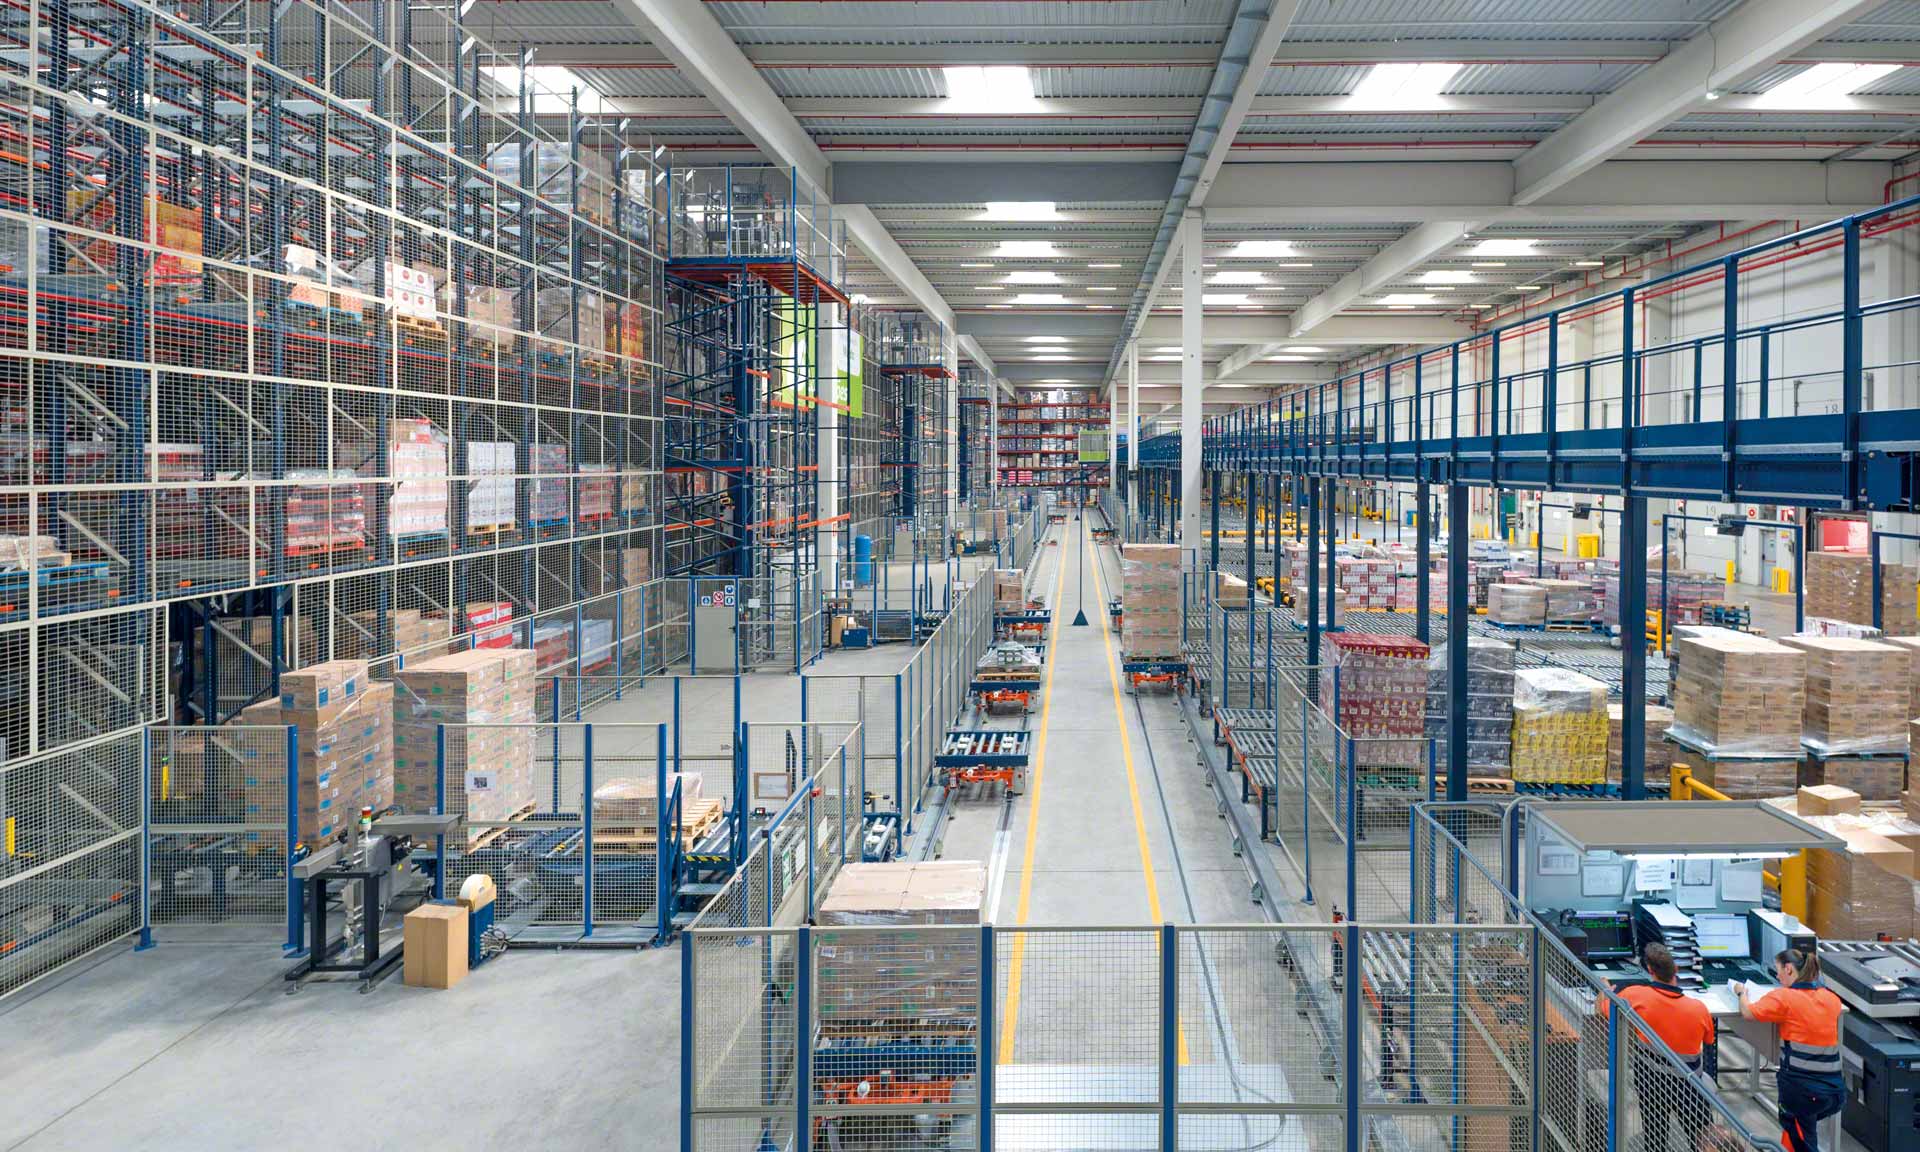 A finished goods warehouse is a facility designed to store products ready to be dispatched to end customers